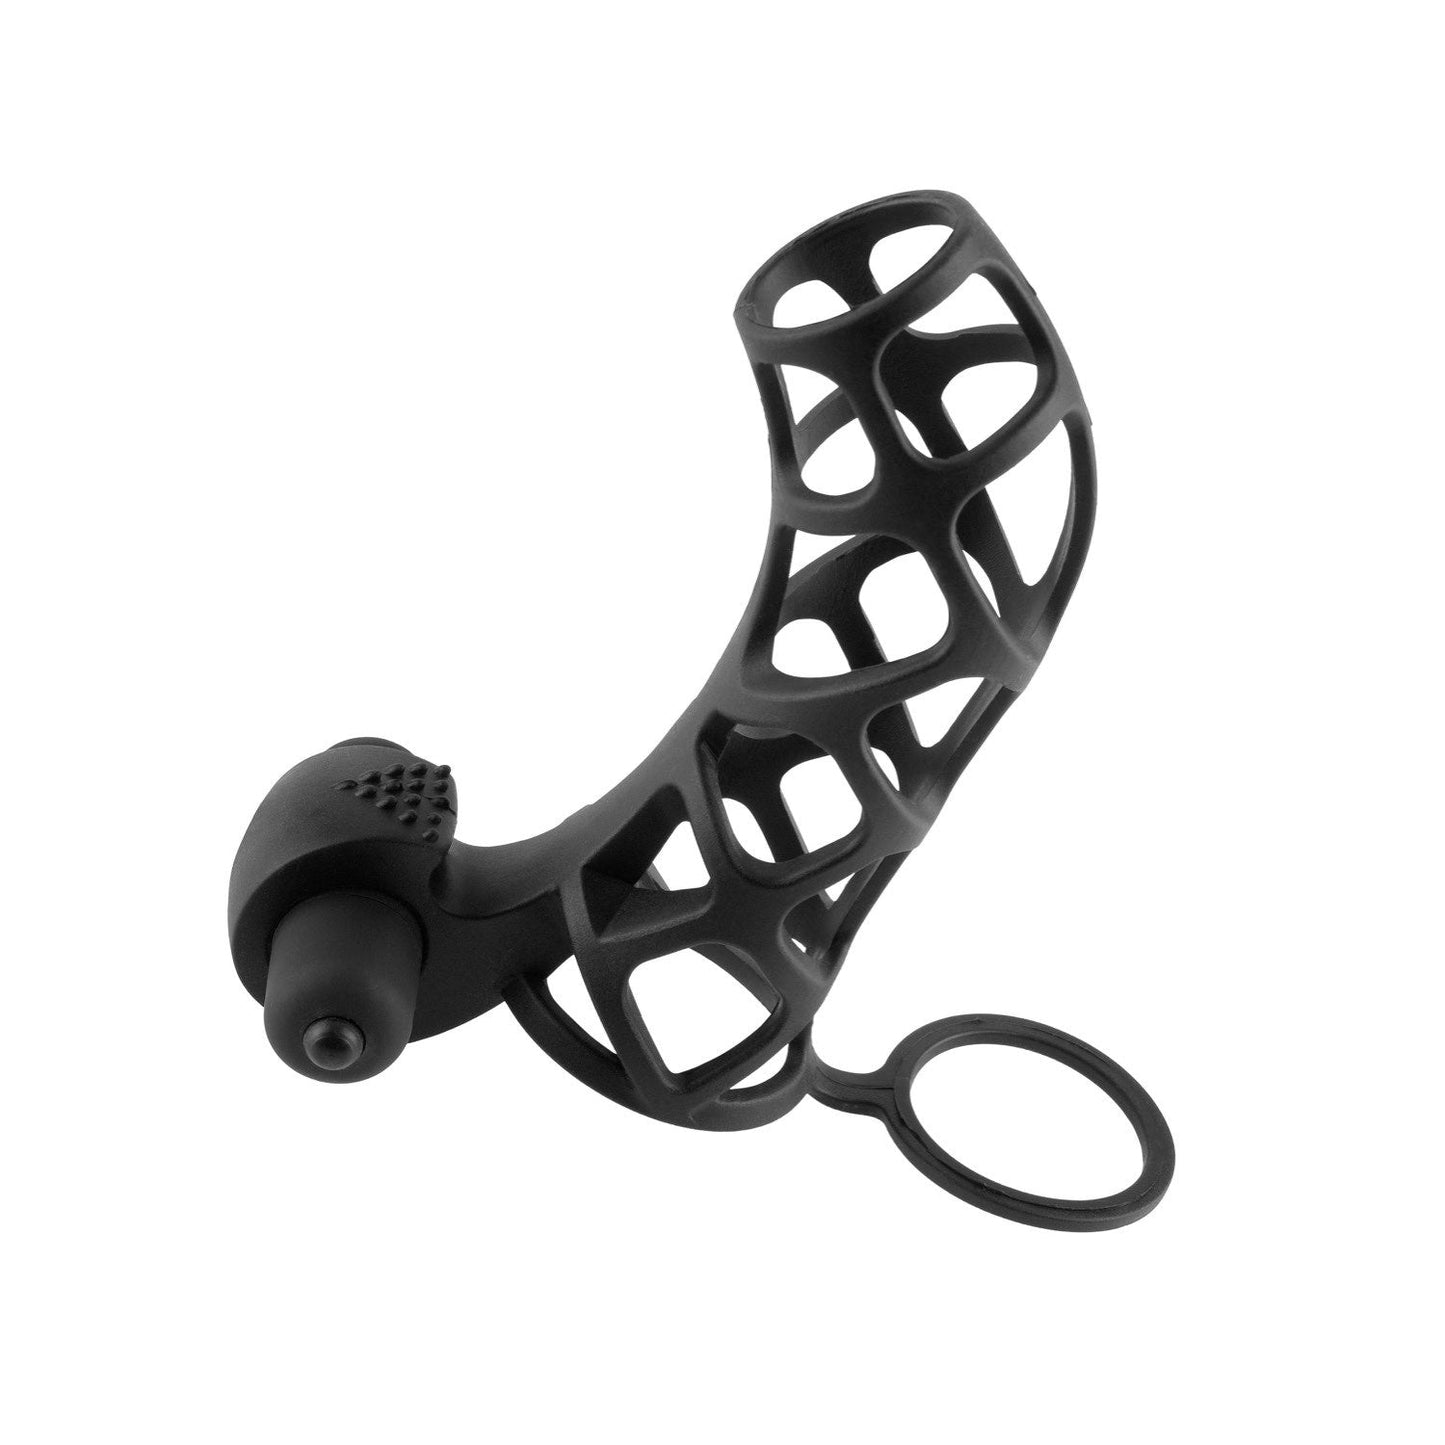 Extreme Silicone Power Cage - Black Penis Sleeve with Ball Strap & Vibrating Clit Stimulator